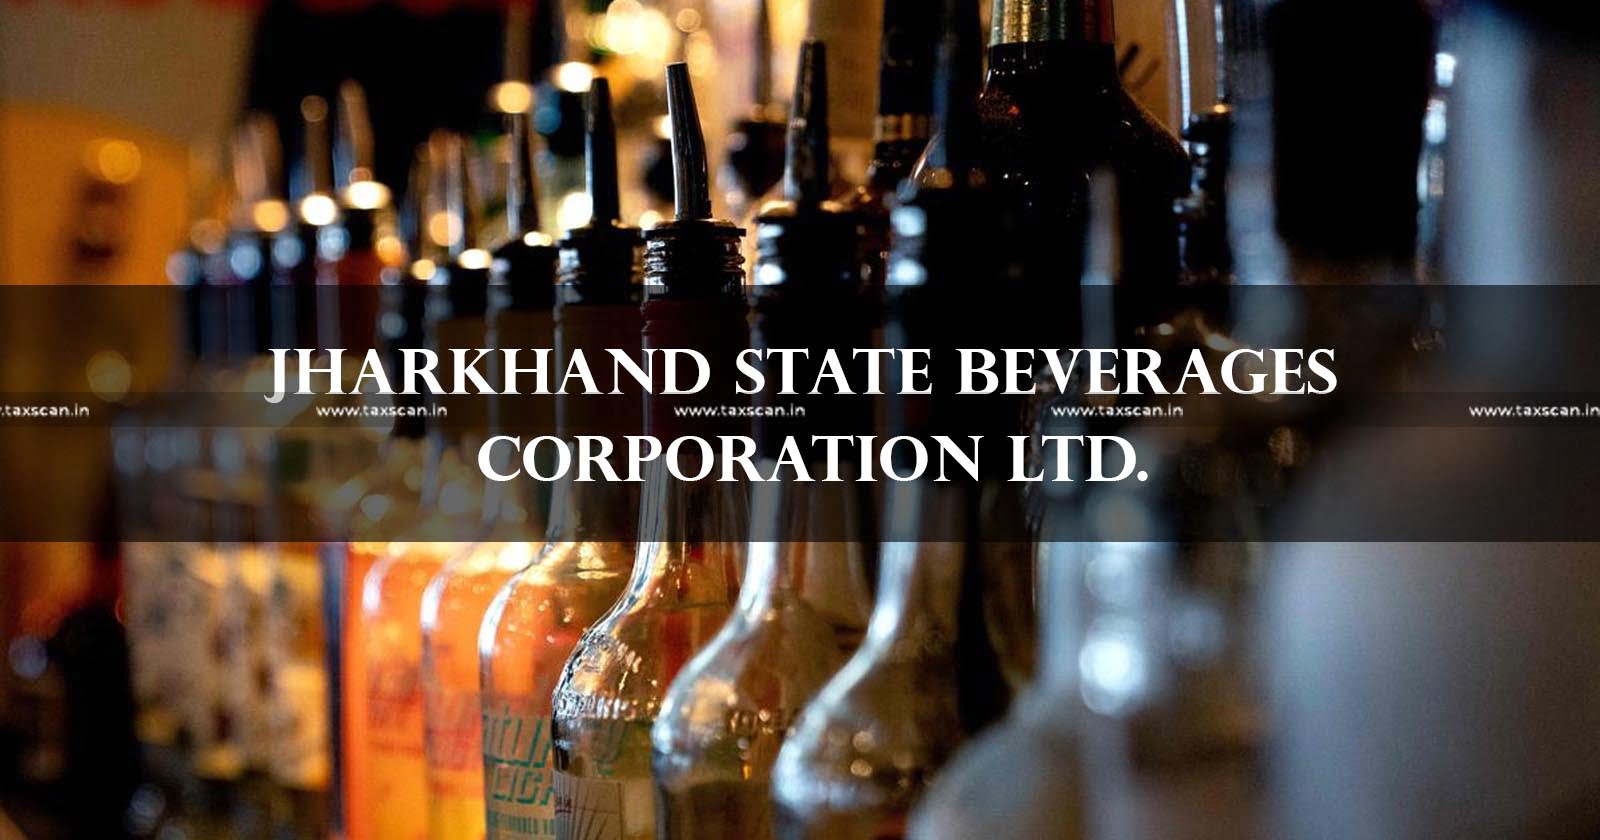 ITAT - Income Tax Addition - Income Tax - Jharkhand State Beverages - State Beverages - Taxscan